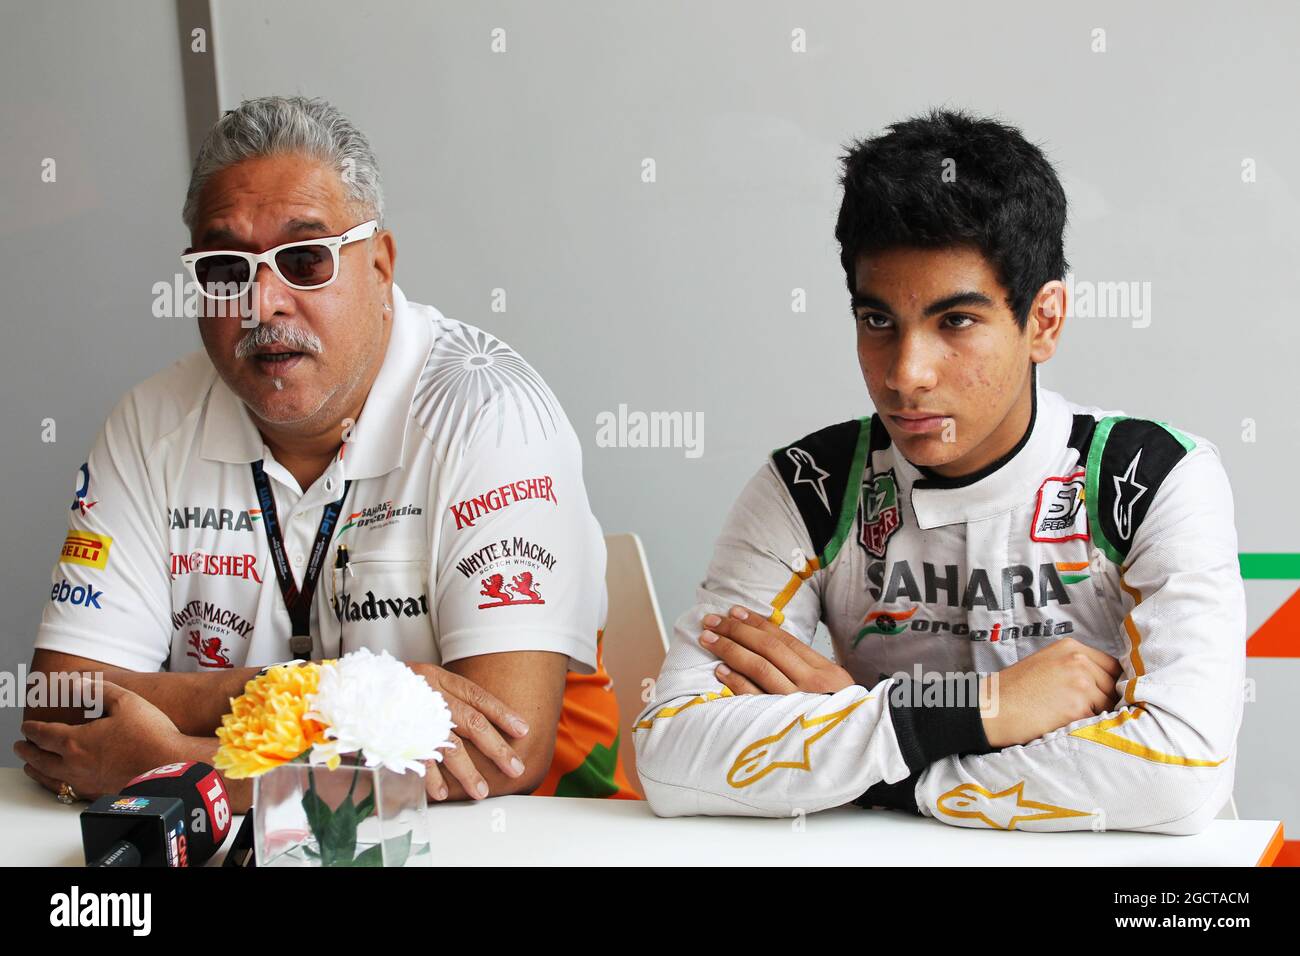 Dr. Vijay Mallya (IND) Sahara Force India F1 Team Owner and Jehan Daruvala (IND) Sahara Force India Academy Driver, winner of the British KF3 Karting Championship, with the media. Indian Grand Prix, Saturday 26th October 2013. Greater Noida, New Delhi, India. Stock Photo